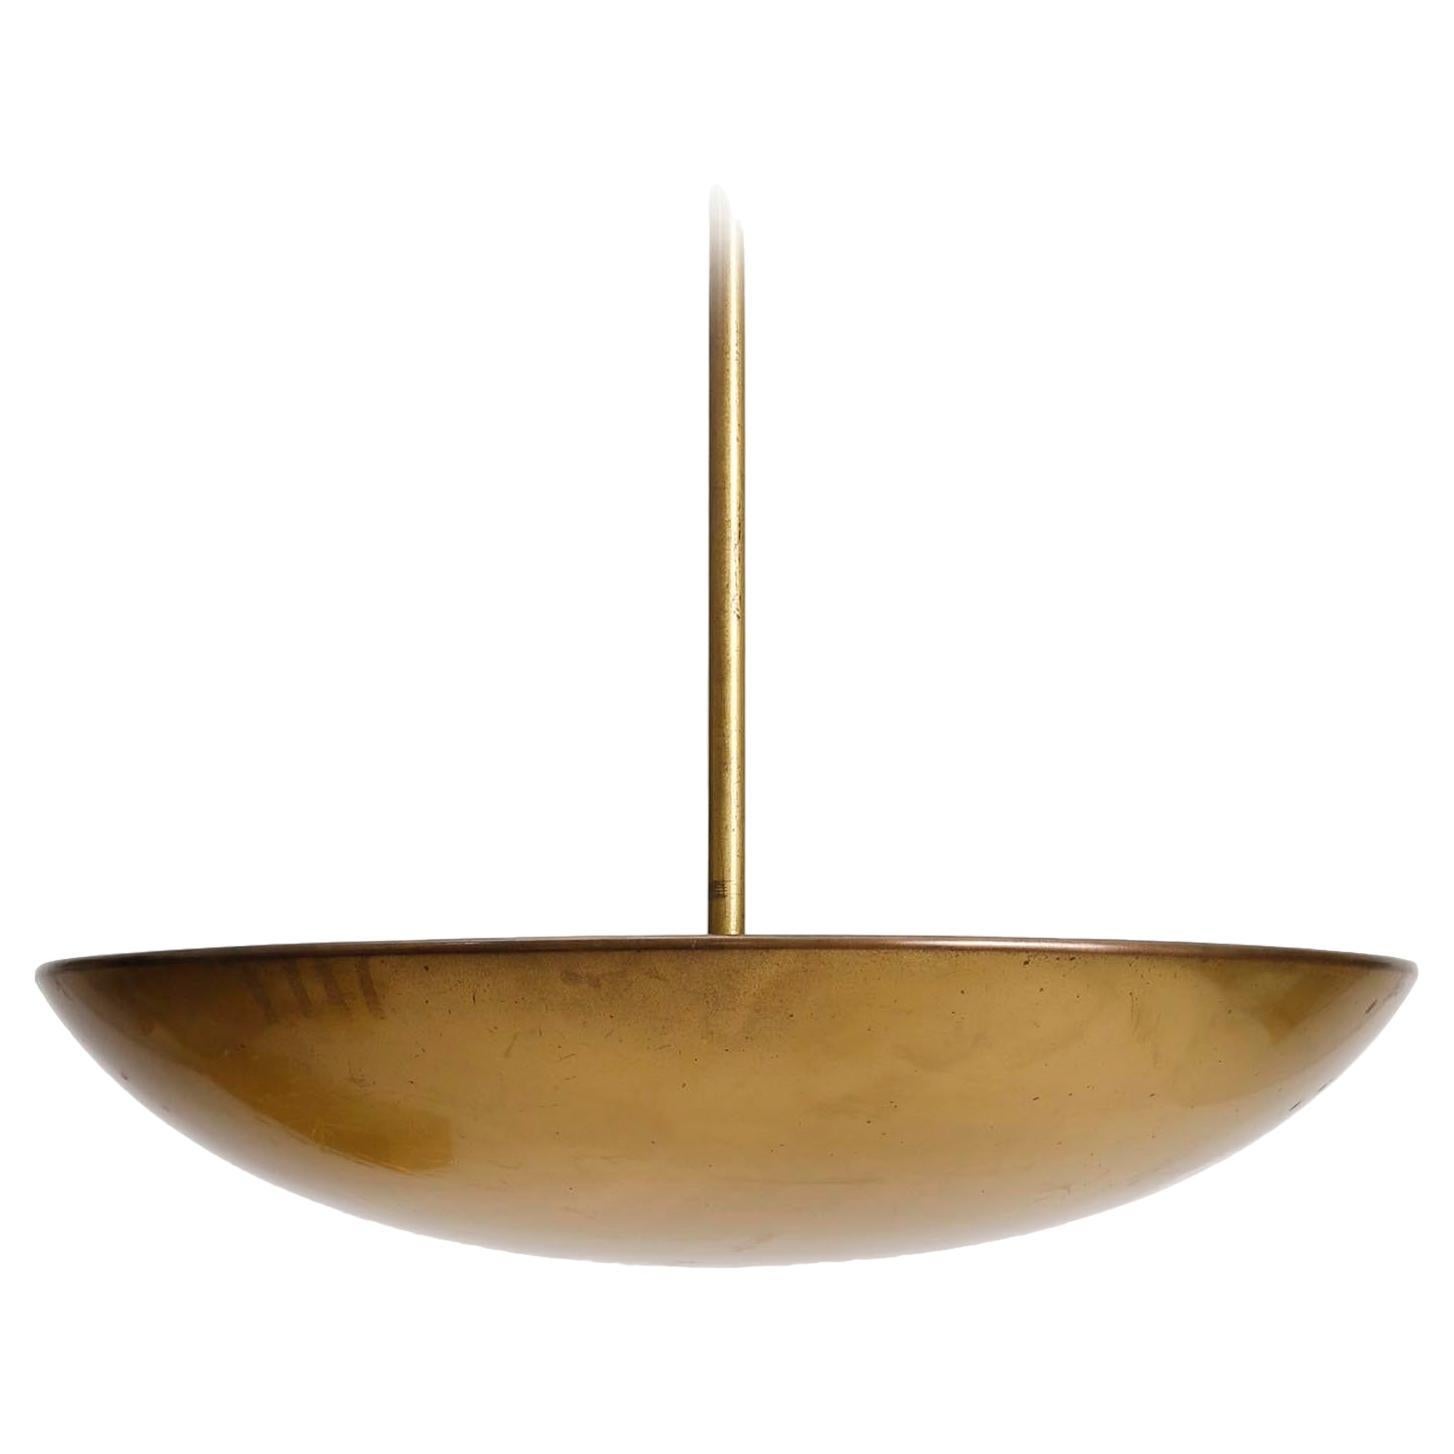 A large polished brass bowl up light chandelier / pendant light by J.T. Kalmar, Austria, manufactured in midcentury, circa 1960 (late 1950s or early 1960s).
The fixture is made of solid polished brass which has an aged surface in a rich and warm